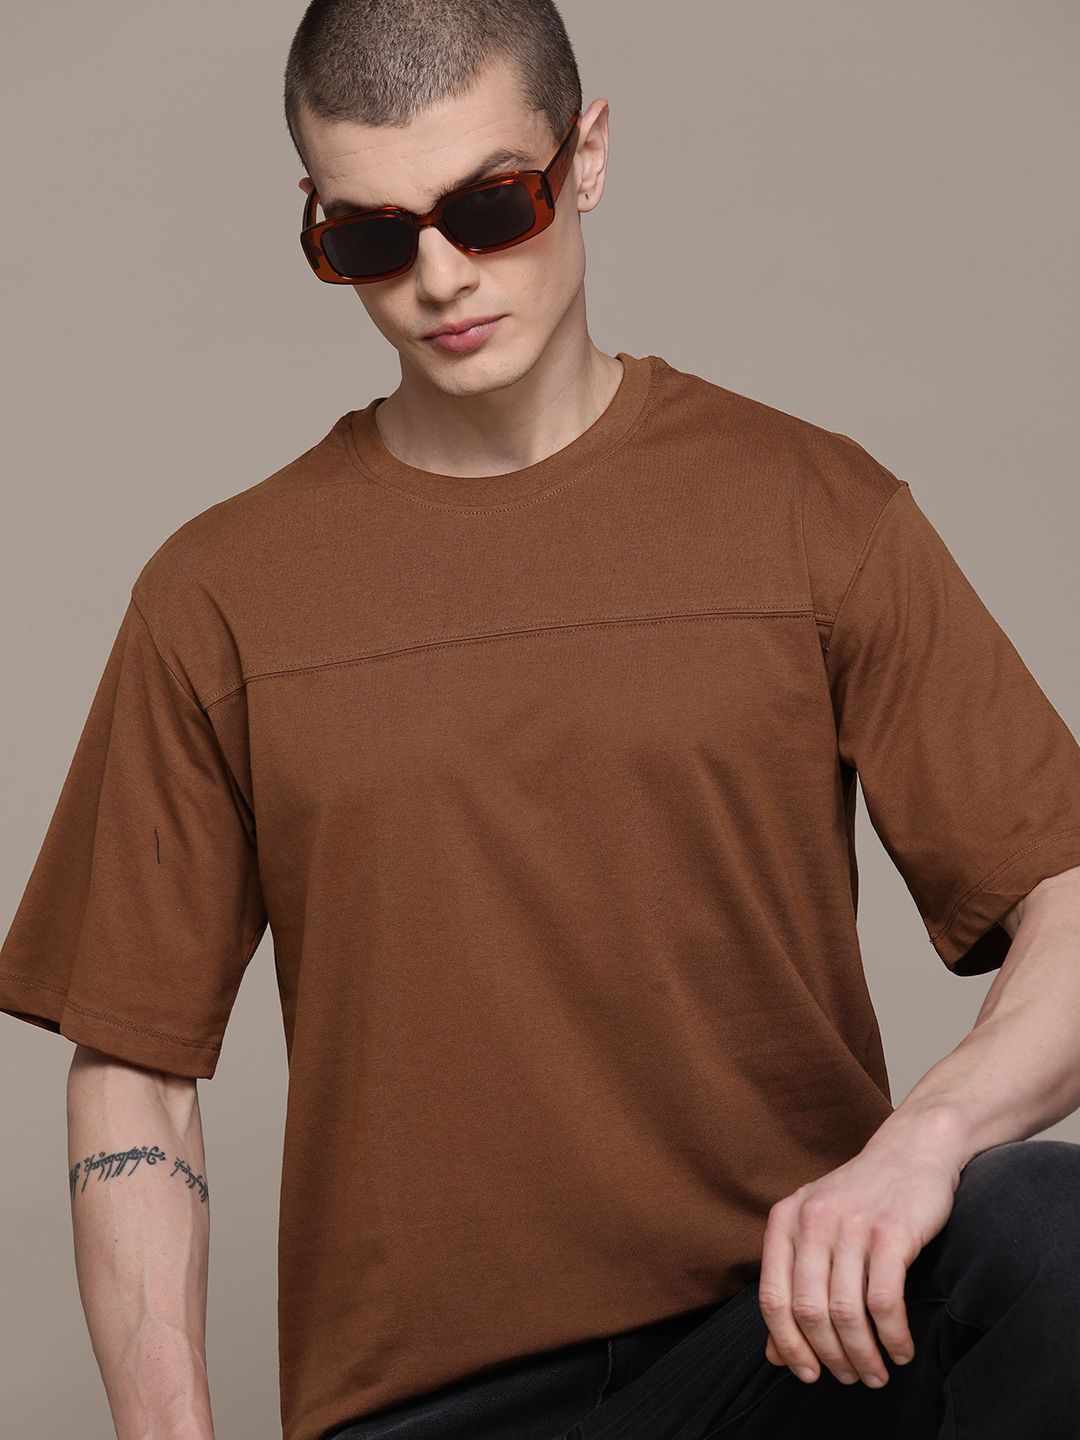 The Roadster Lifestyle Co. Relaxed Fit T-shirt